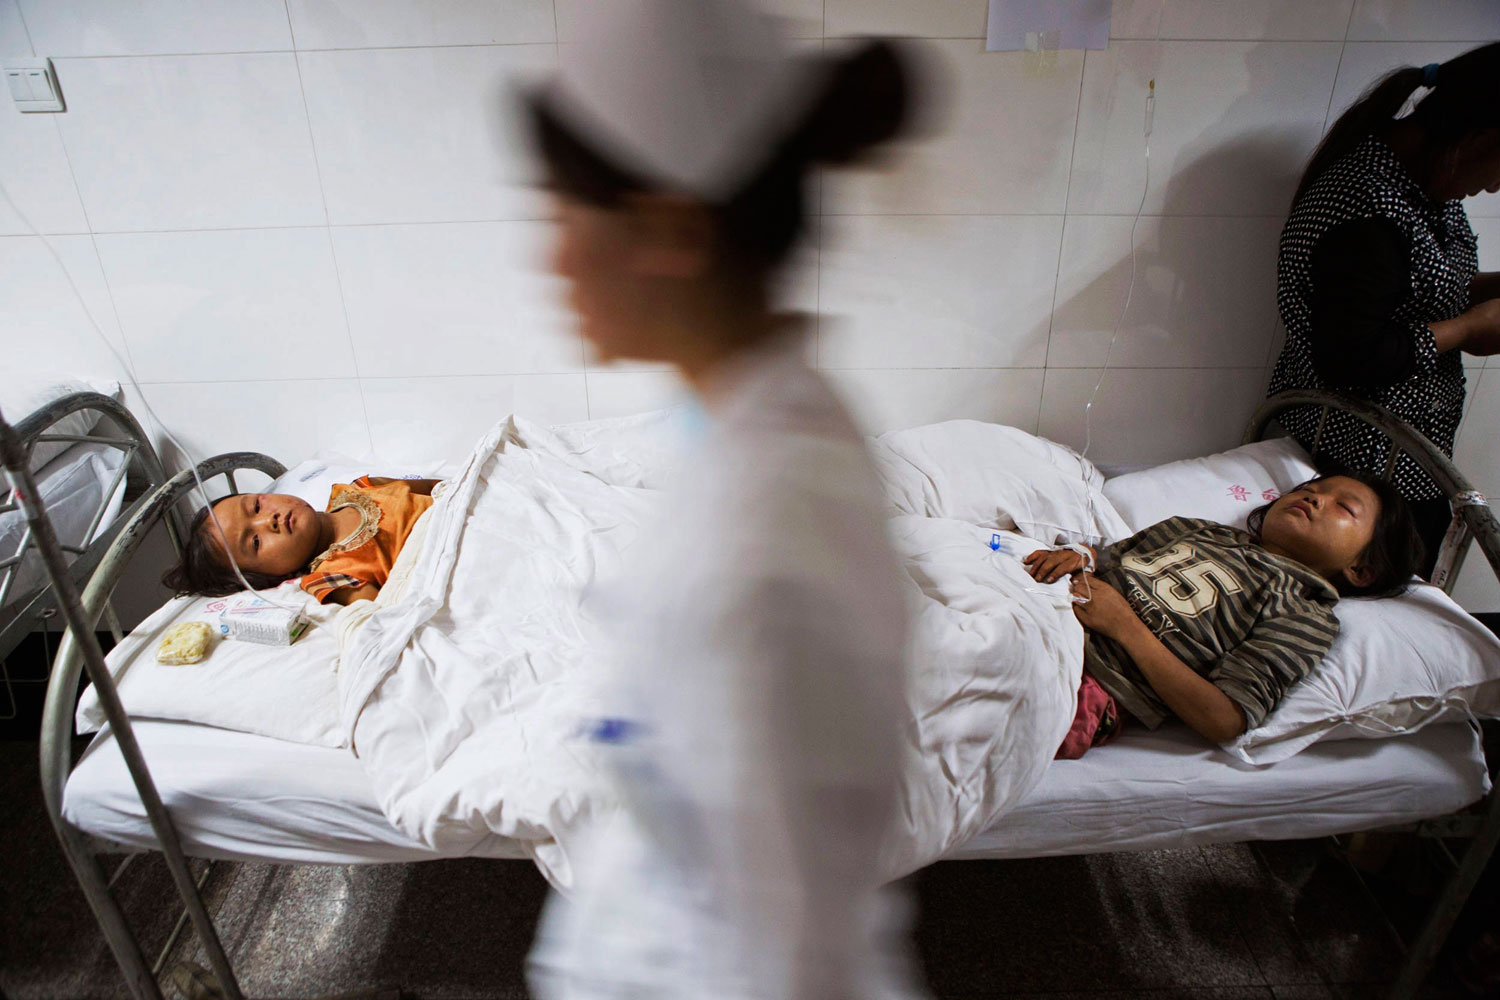 Children are treated at a hospital in Ludian county, after a magnitude 6.3 earthquake hit Zhaotong, Yunnan province on Aug. 3, 2014.